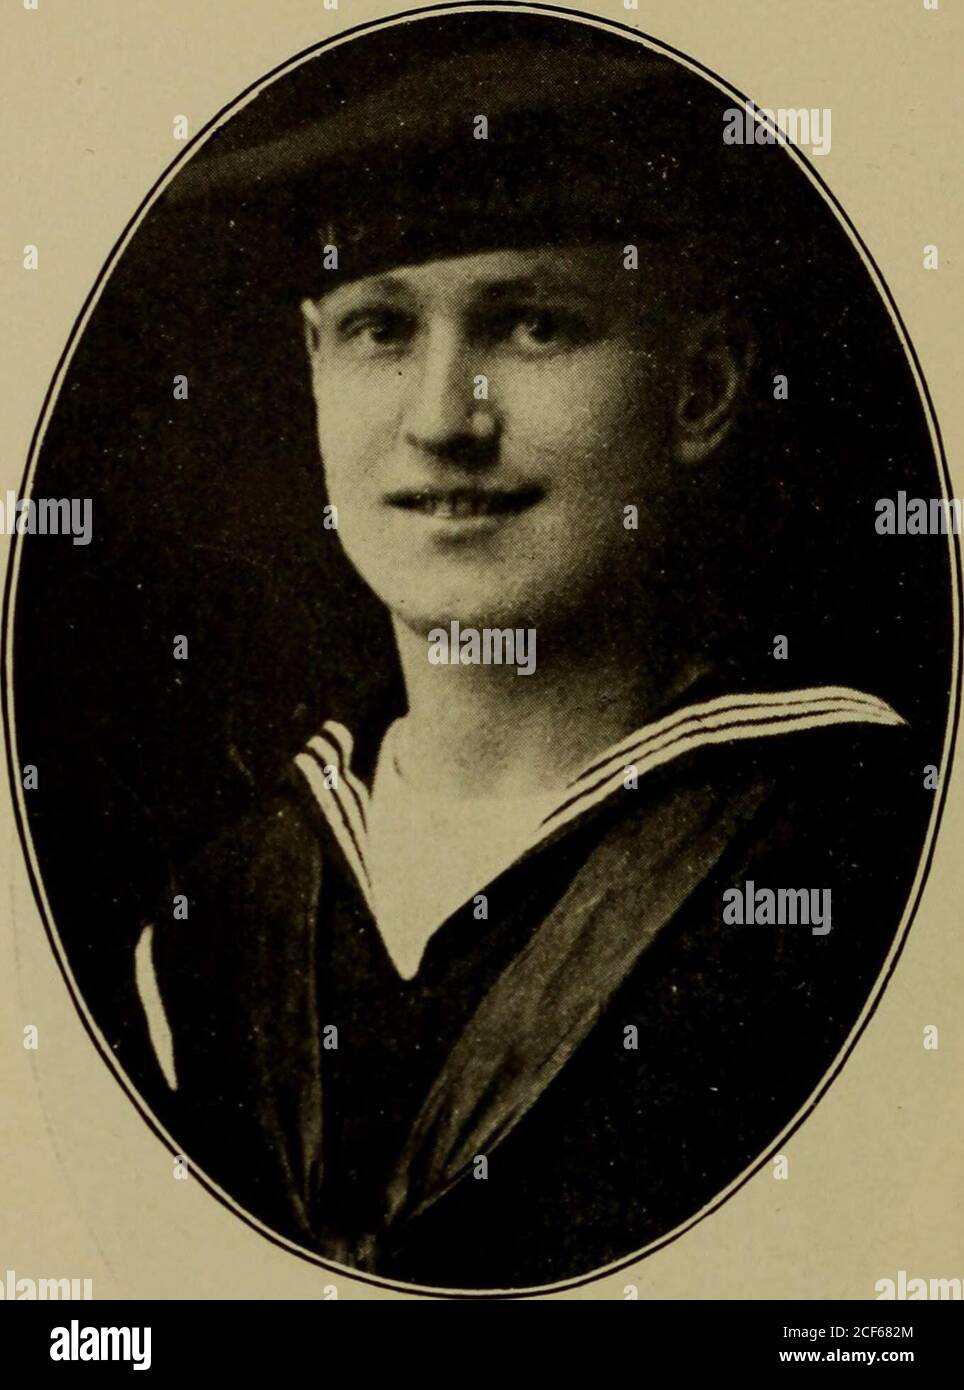 . Lansdowne school and the world war. De Forrest Willard Skilling enlisted in the Navy April2, 1917. He served on the S. S. Beale, M. S. No. 1; S. S. Dela-ware, S. P. 467. Then he was transferred to Pelham Bay Train-ing Station, Long Island. From here he was granted a furloughhome to await travel orders. While home he became a victim ofthe flu and died October 12, 1918. His loss was keenly felt,for he was highly esteemed by all who knew him. 123. RussEL Clayton Stokes enlisted March 29, 191S. He was put inthe training station at Xevvport, R. I. until July 14, 1918. He thenleft Halifax on an En Stock Photo